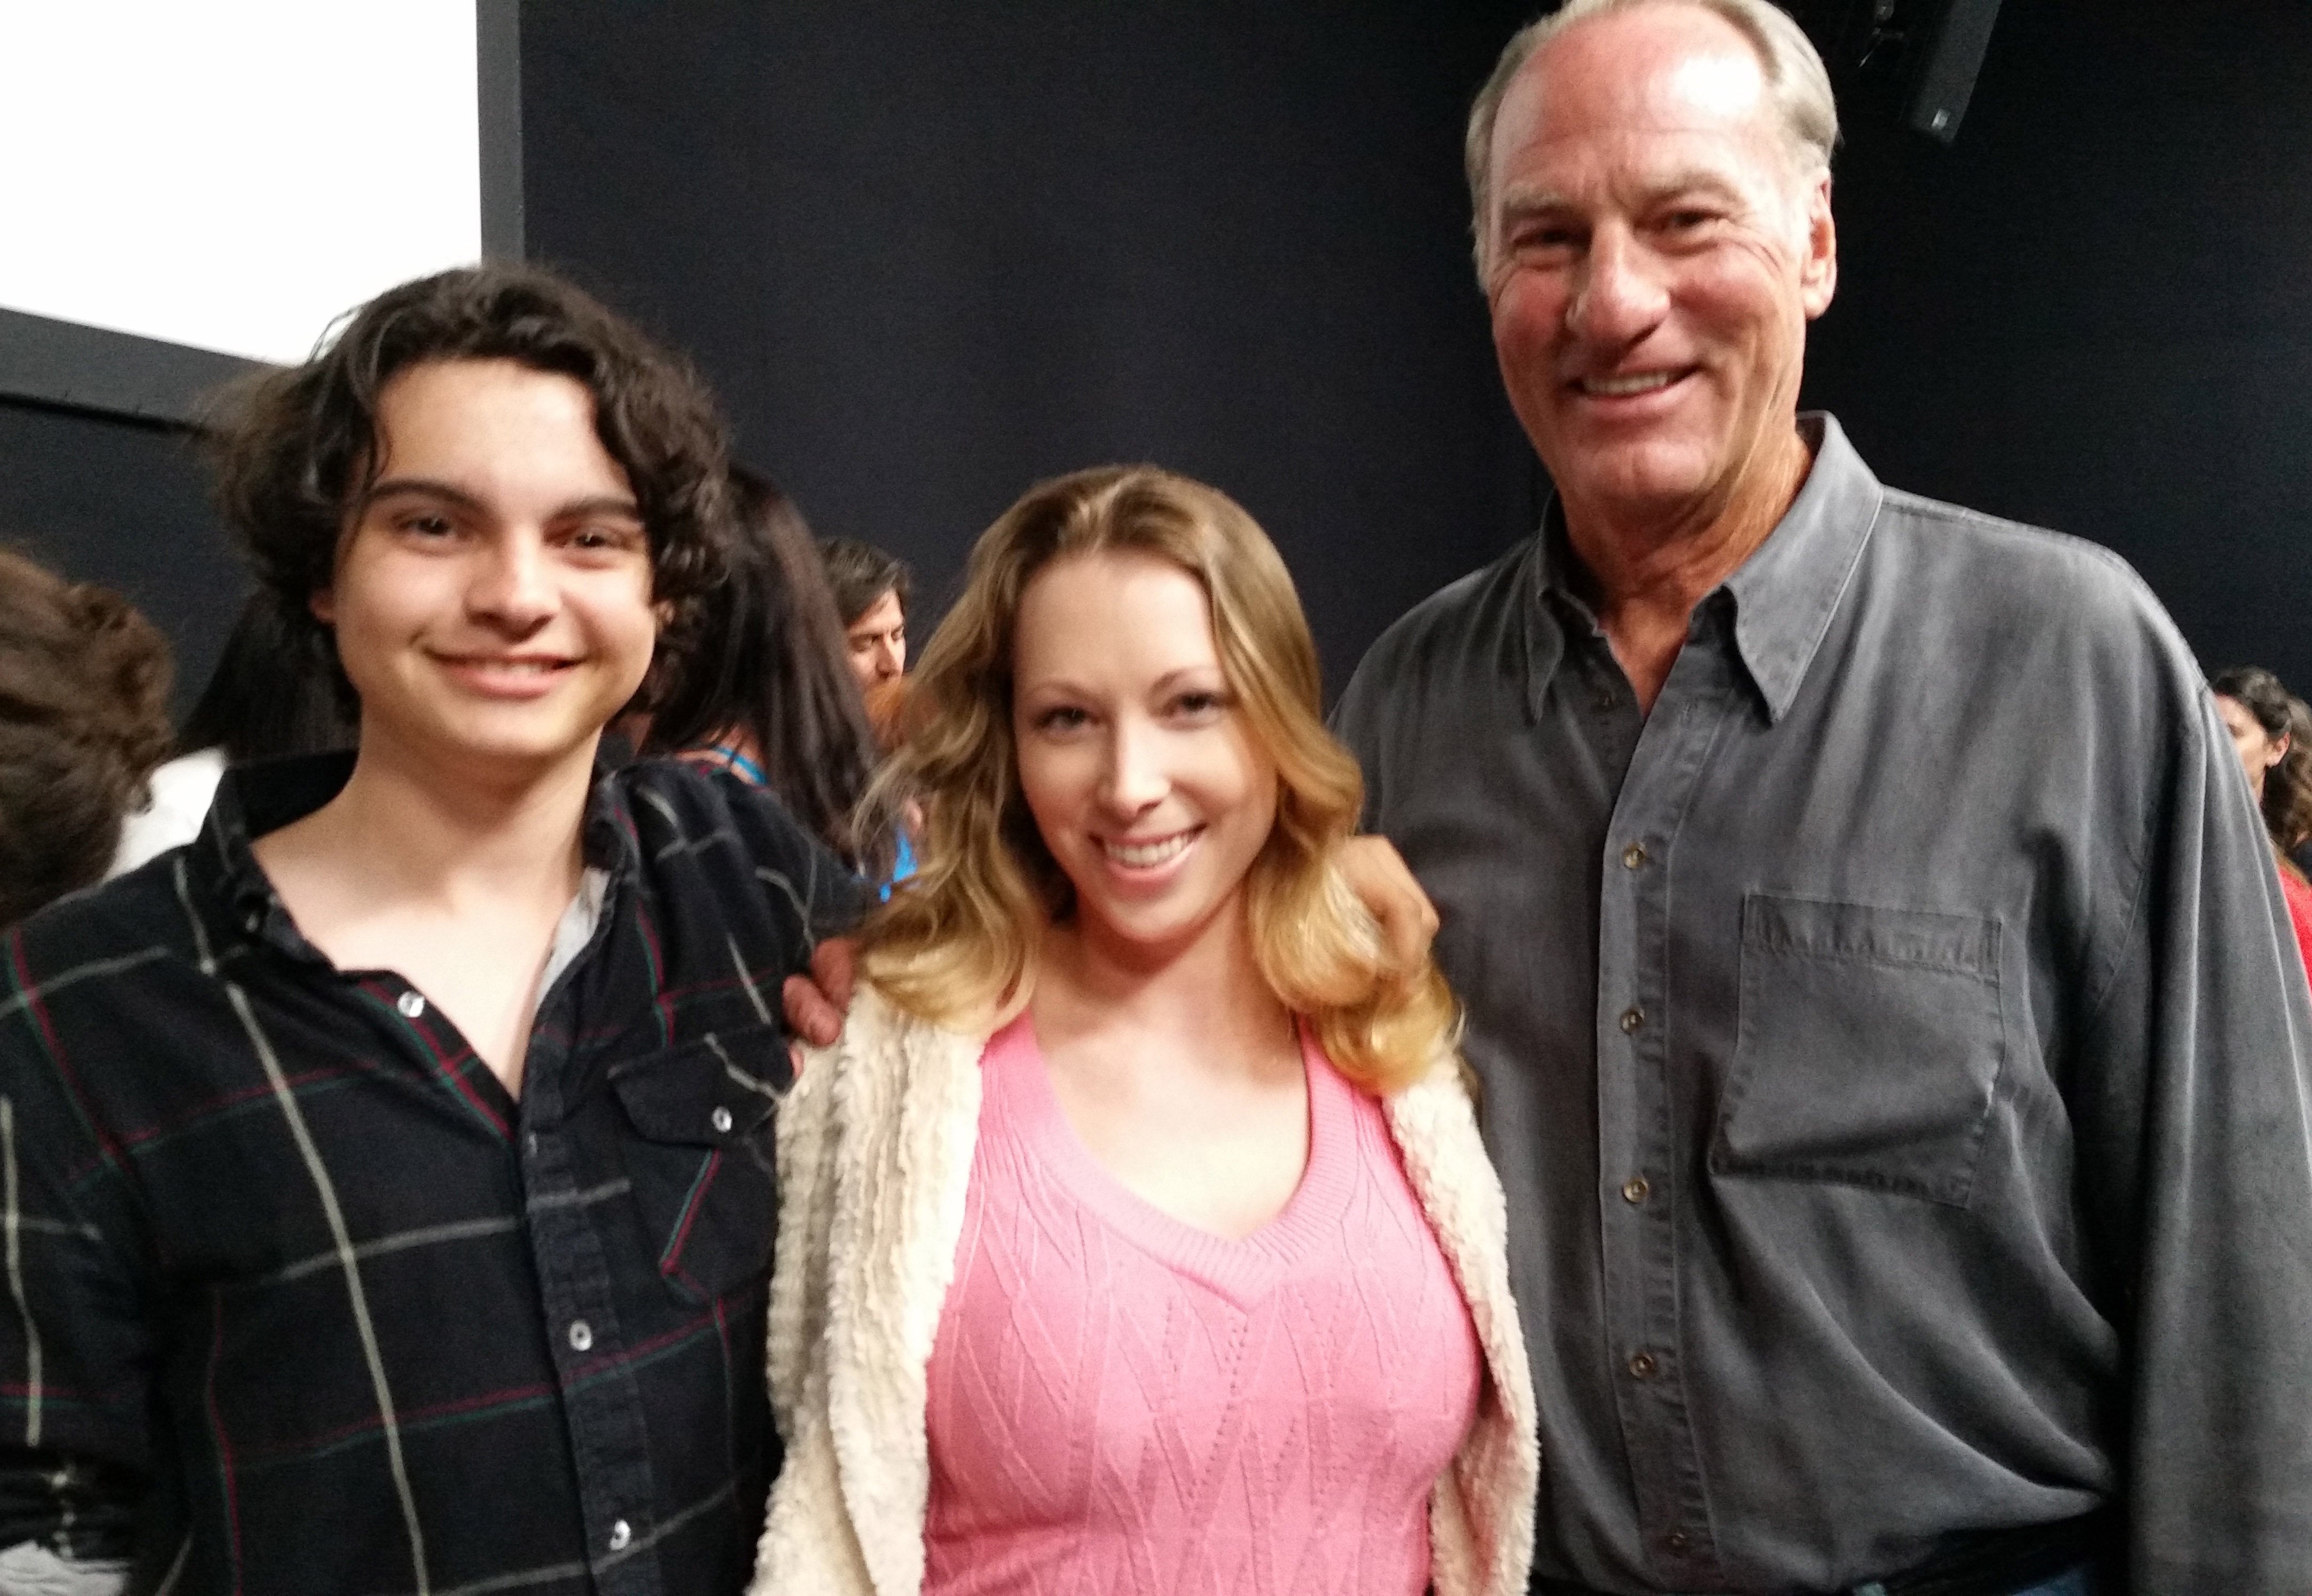 Jennifer Day with Craig T. Nelson, and Max Burkholder, from 